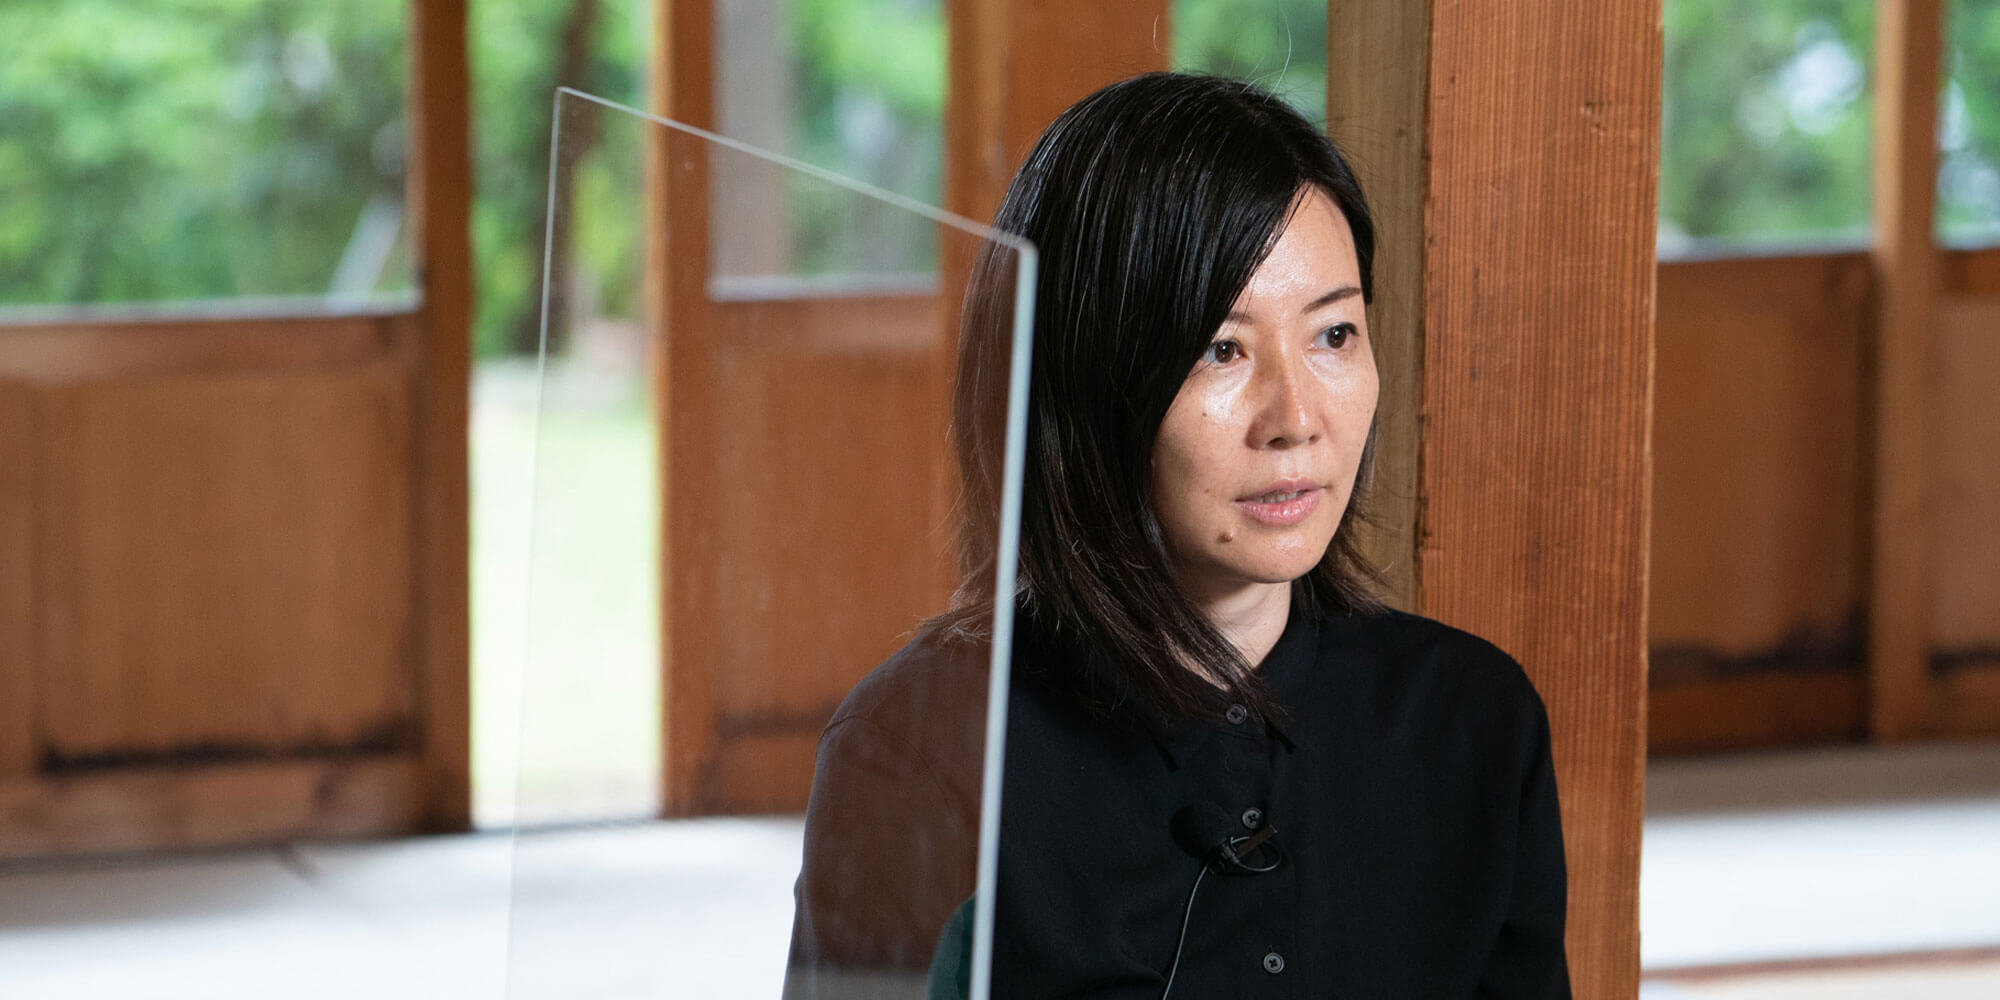 Kyoko Kunoh, Ars Electronica Ambassador, gave a lecture on the history and role of media art in envisioning the future of society.